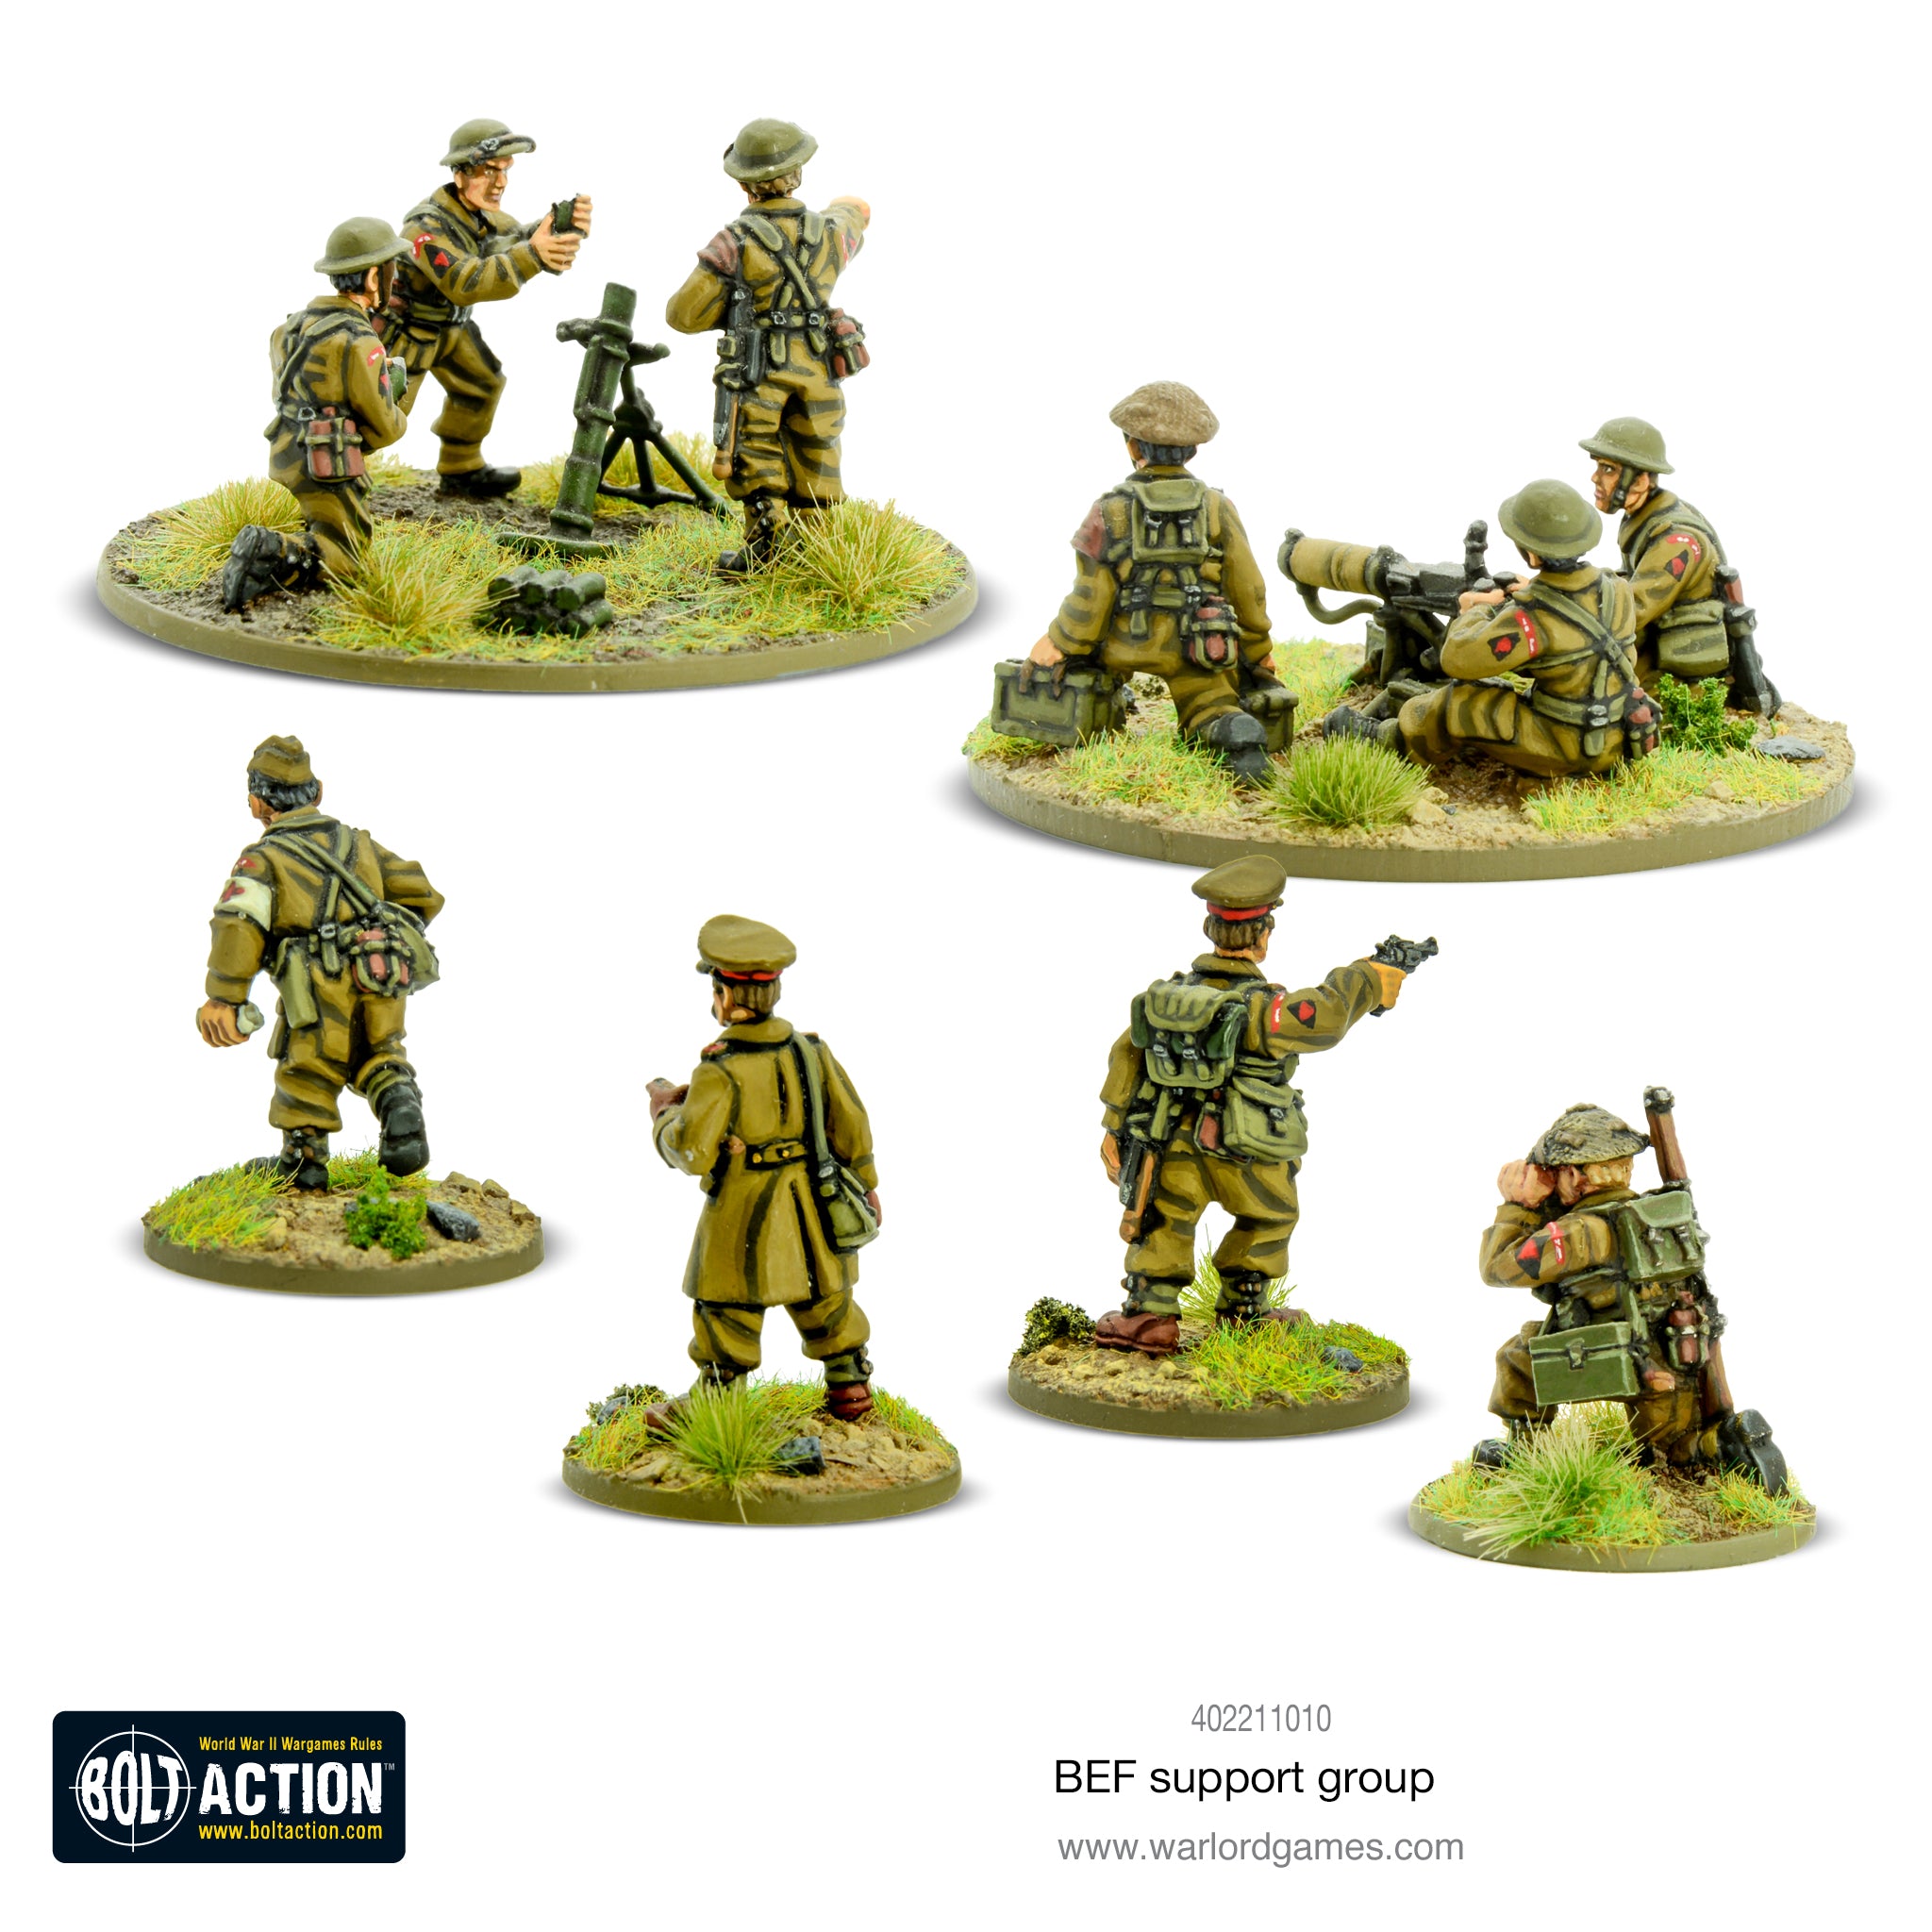 BEF support group – Warlord Games Ltd